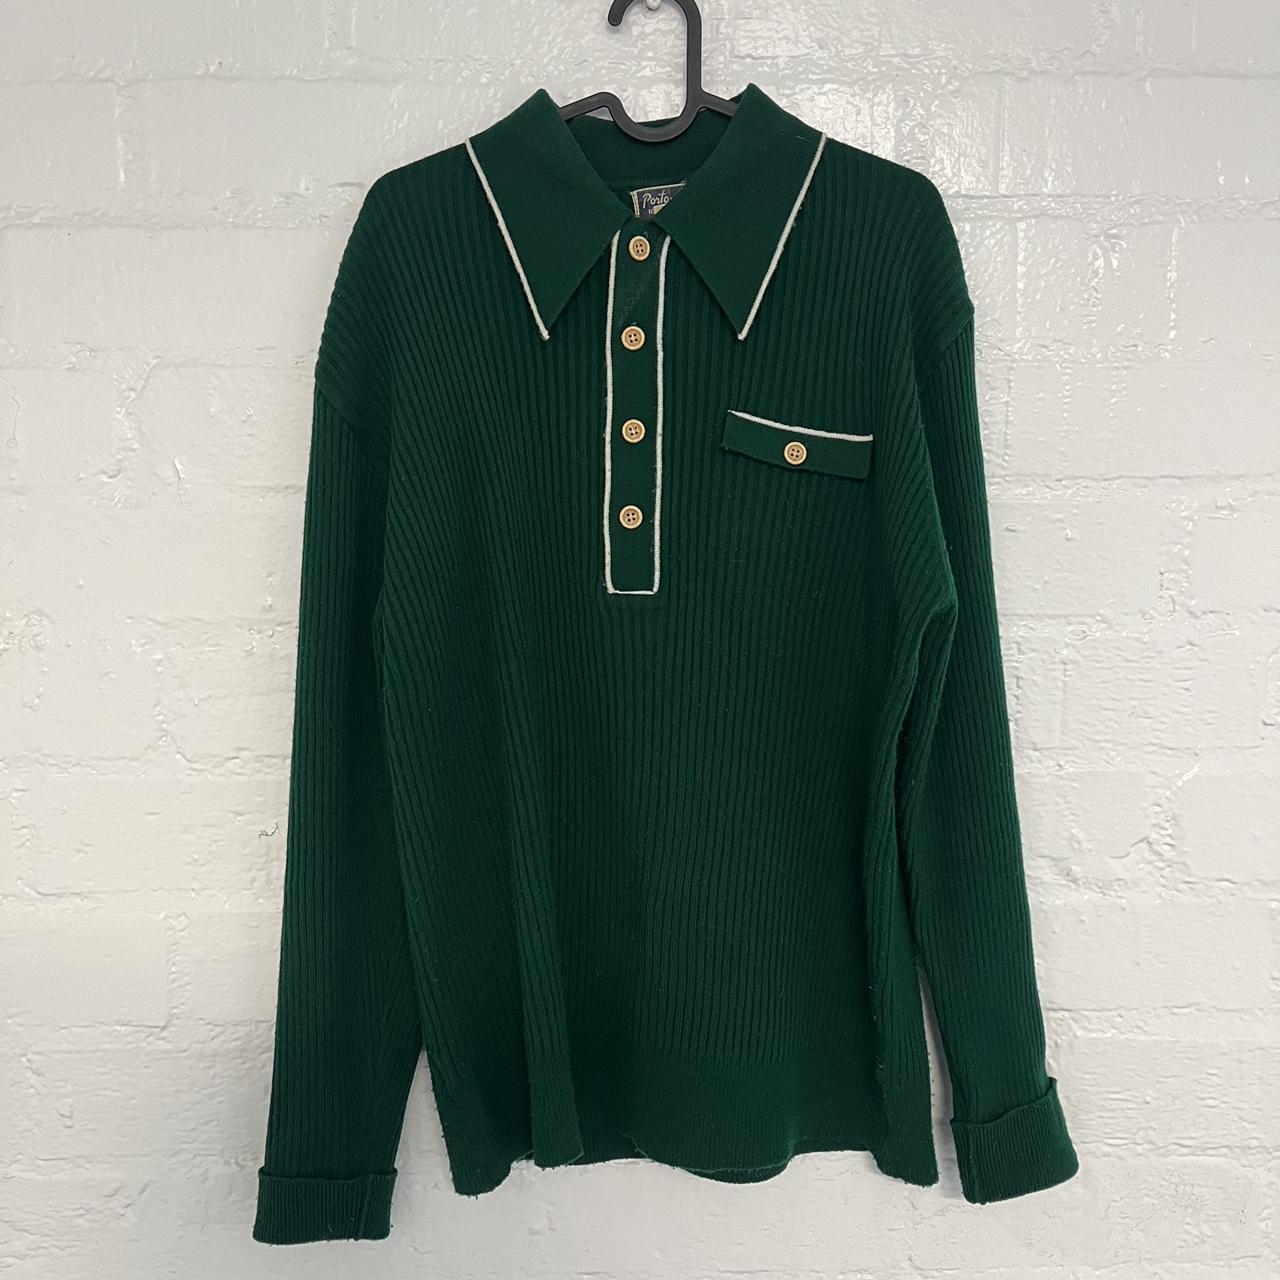 Green knitted vintage sweater 70s collar #green... - Depop